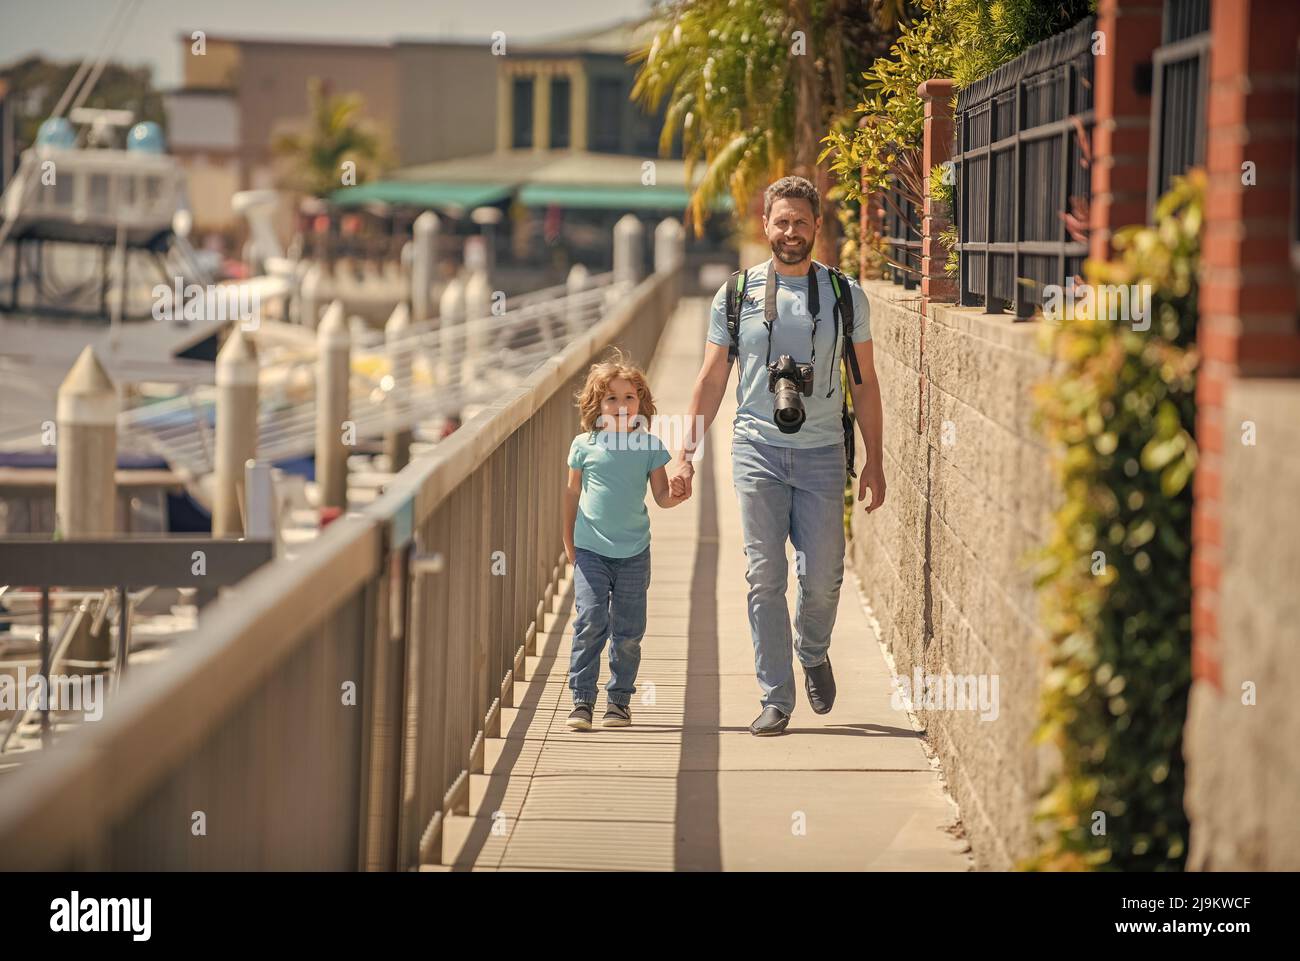 Leisure travelers. Man and boy promenade holding hands. Leisure activities. Father and son child Stock Photo